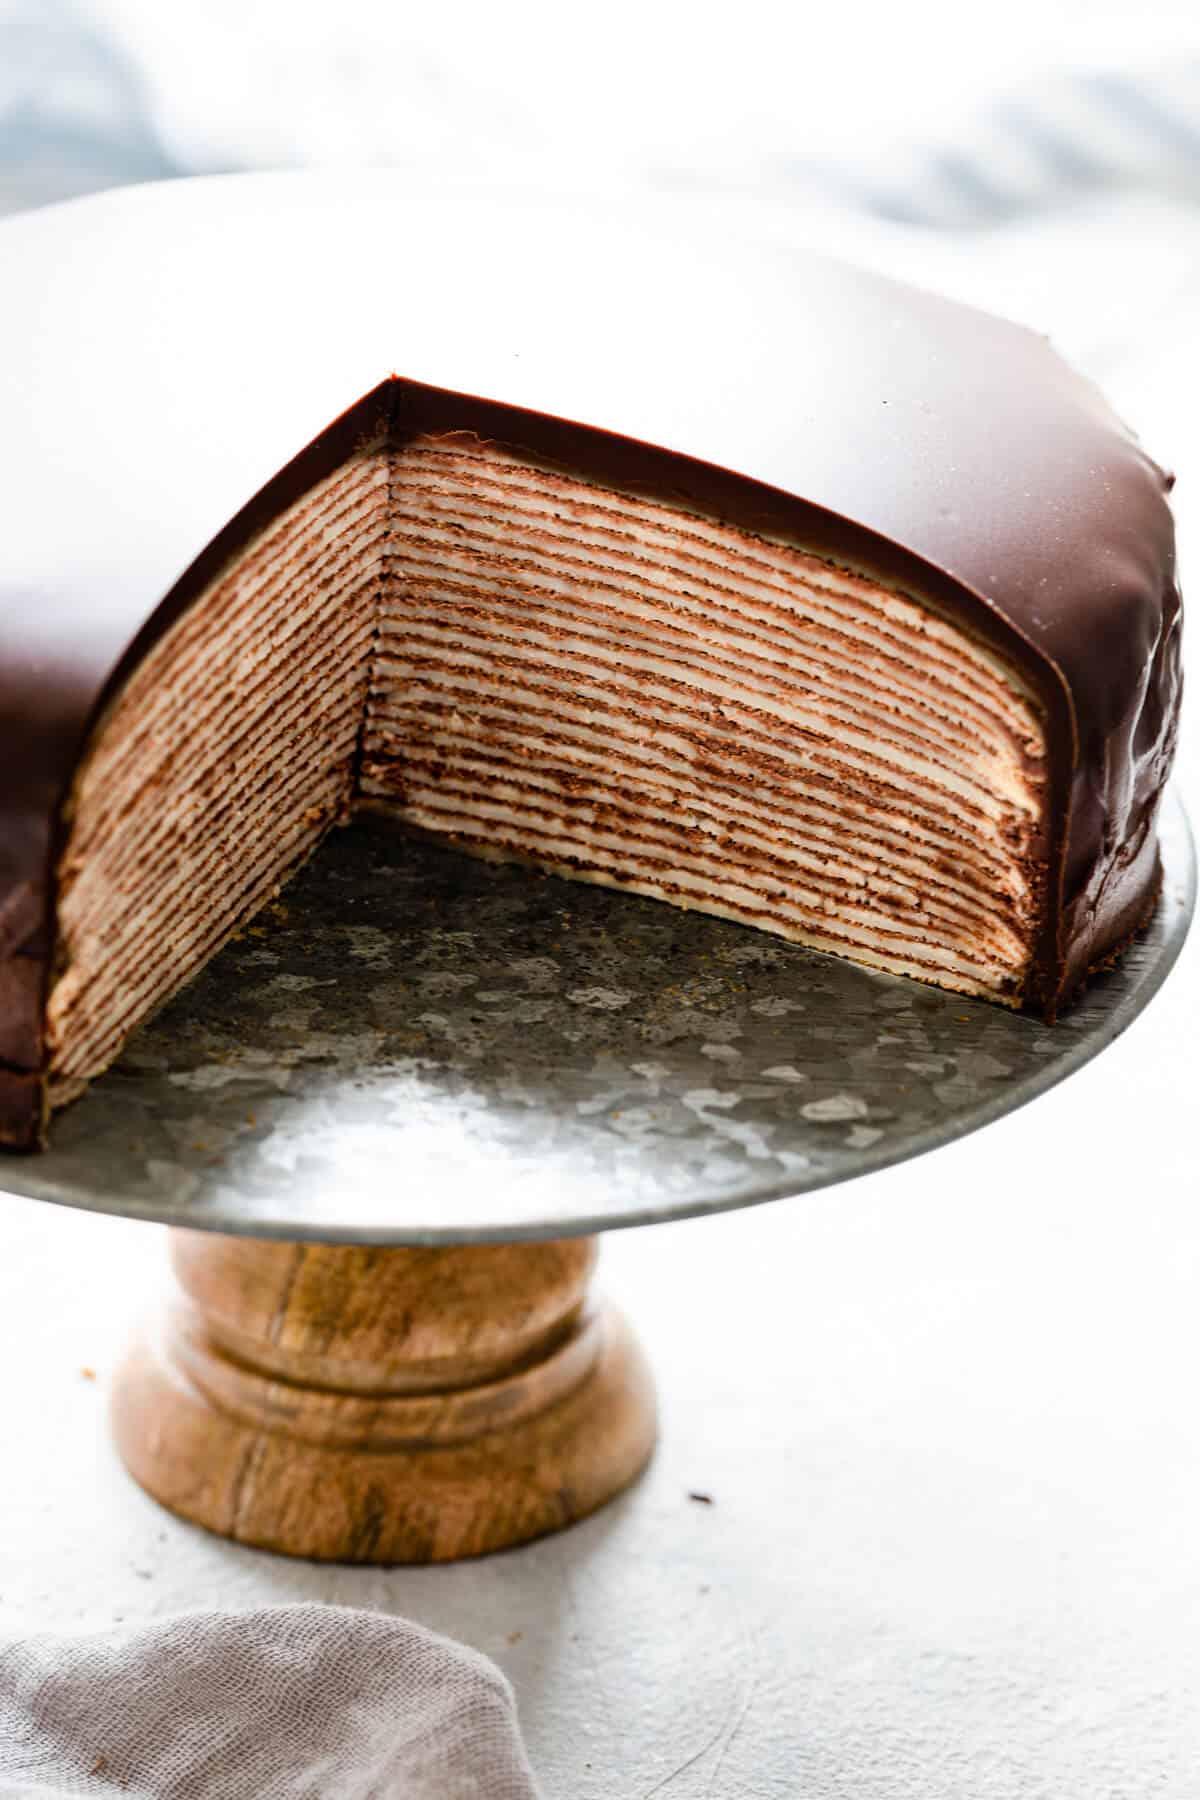 close up shot showing the inside layers of crepe cake